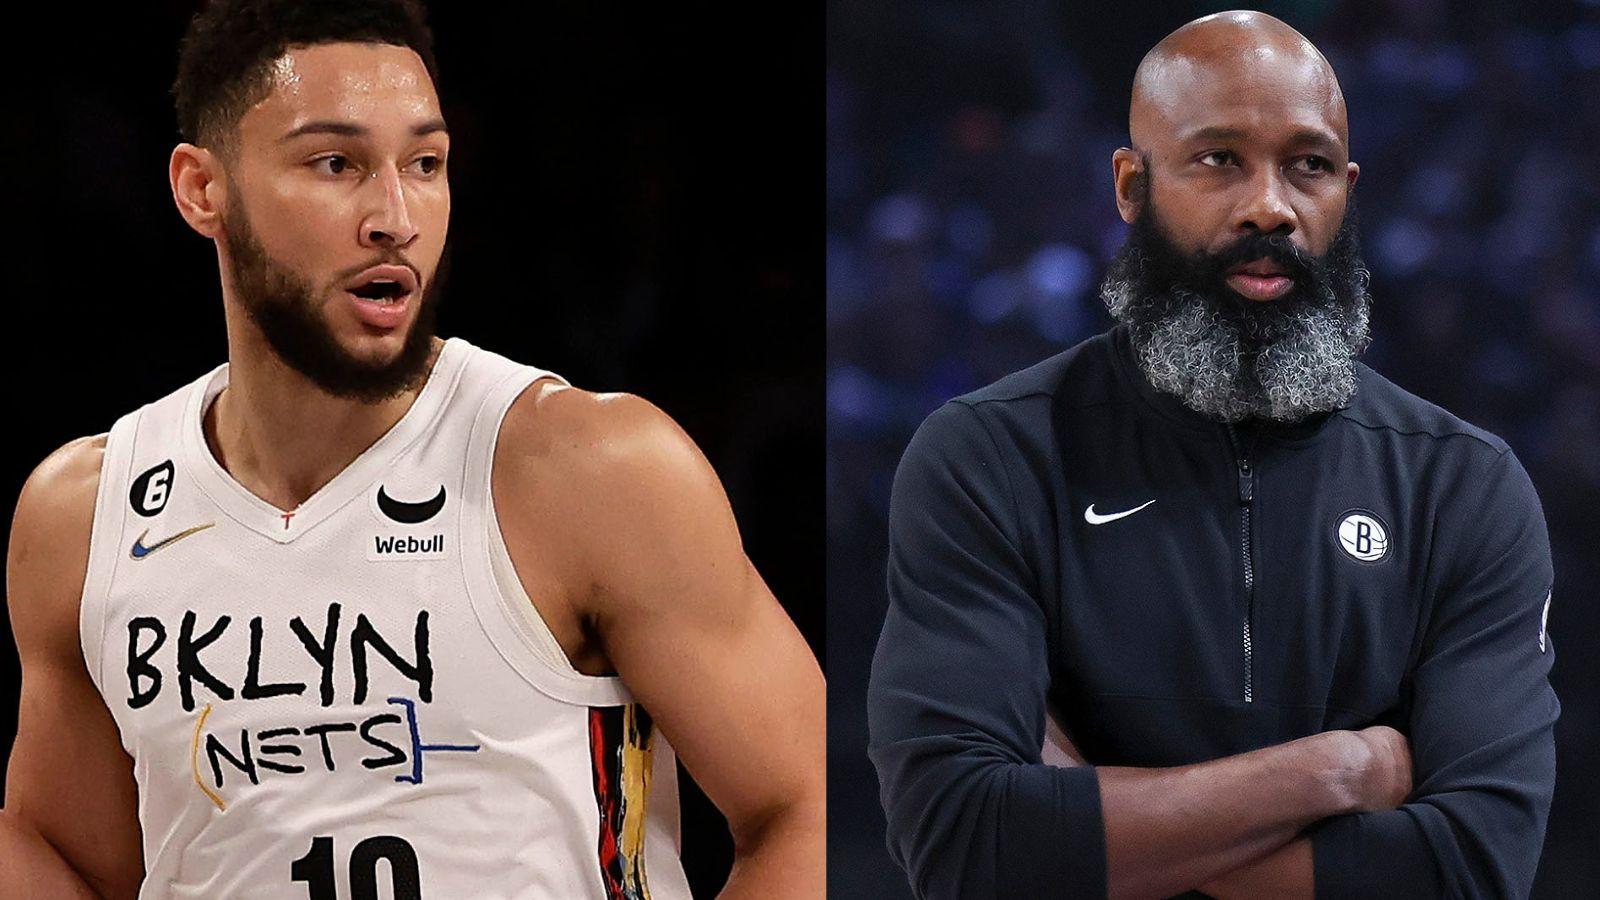 Ben Simmons (left) and Jacque Vaughn (right) as members of the Brooklyn Nets.